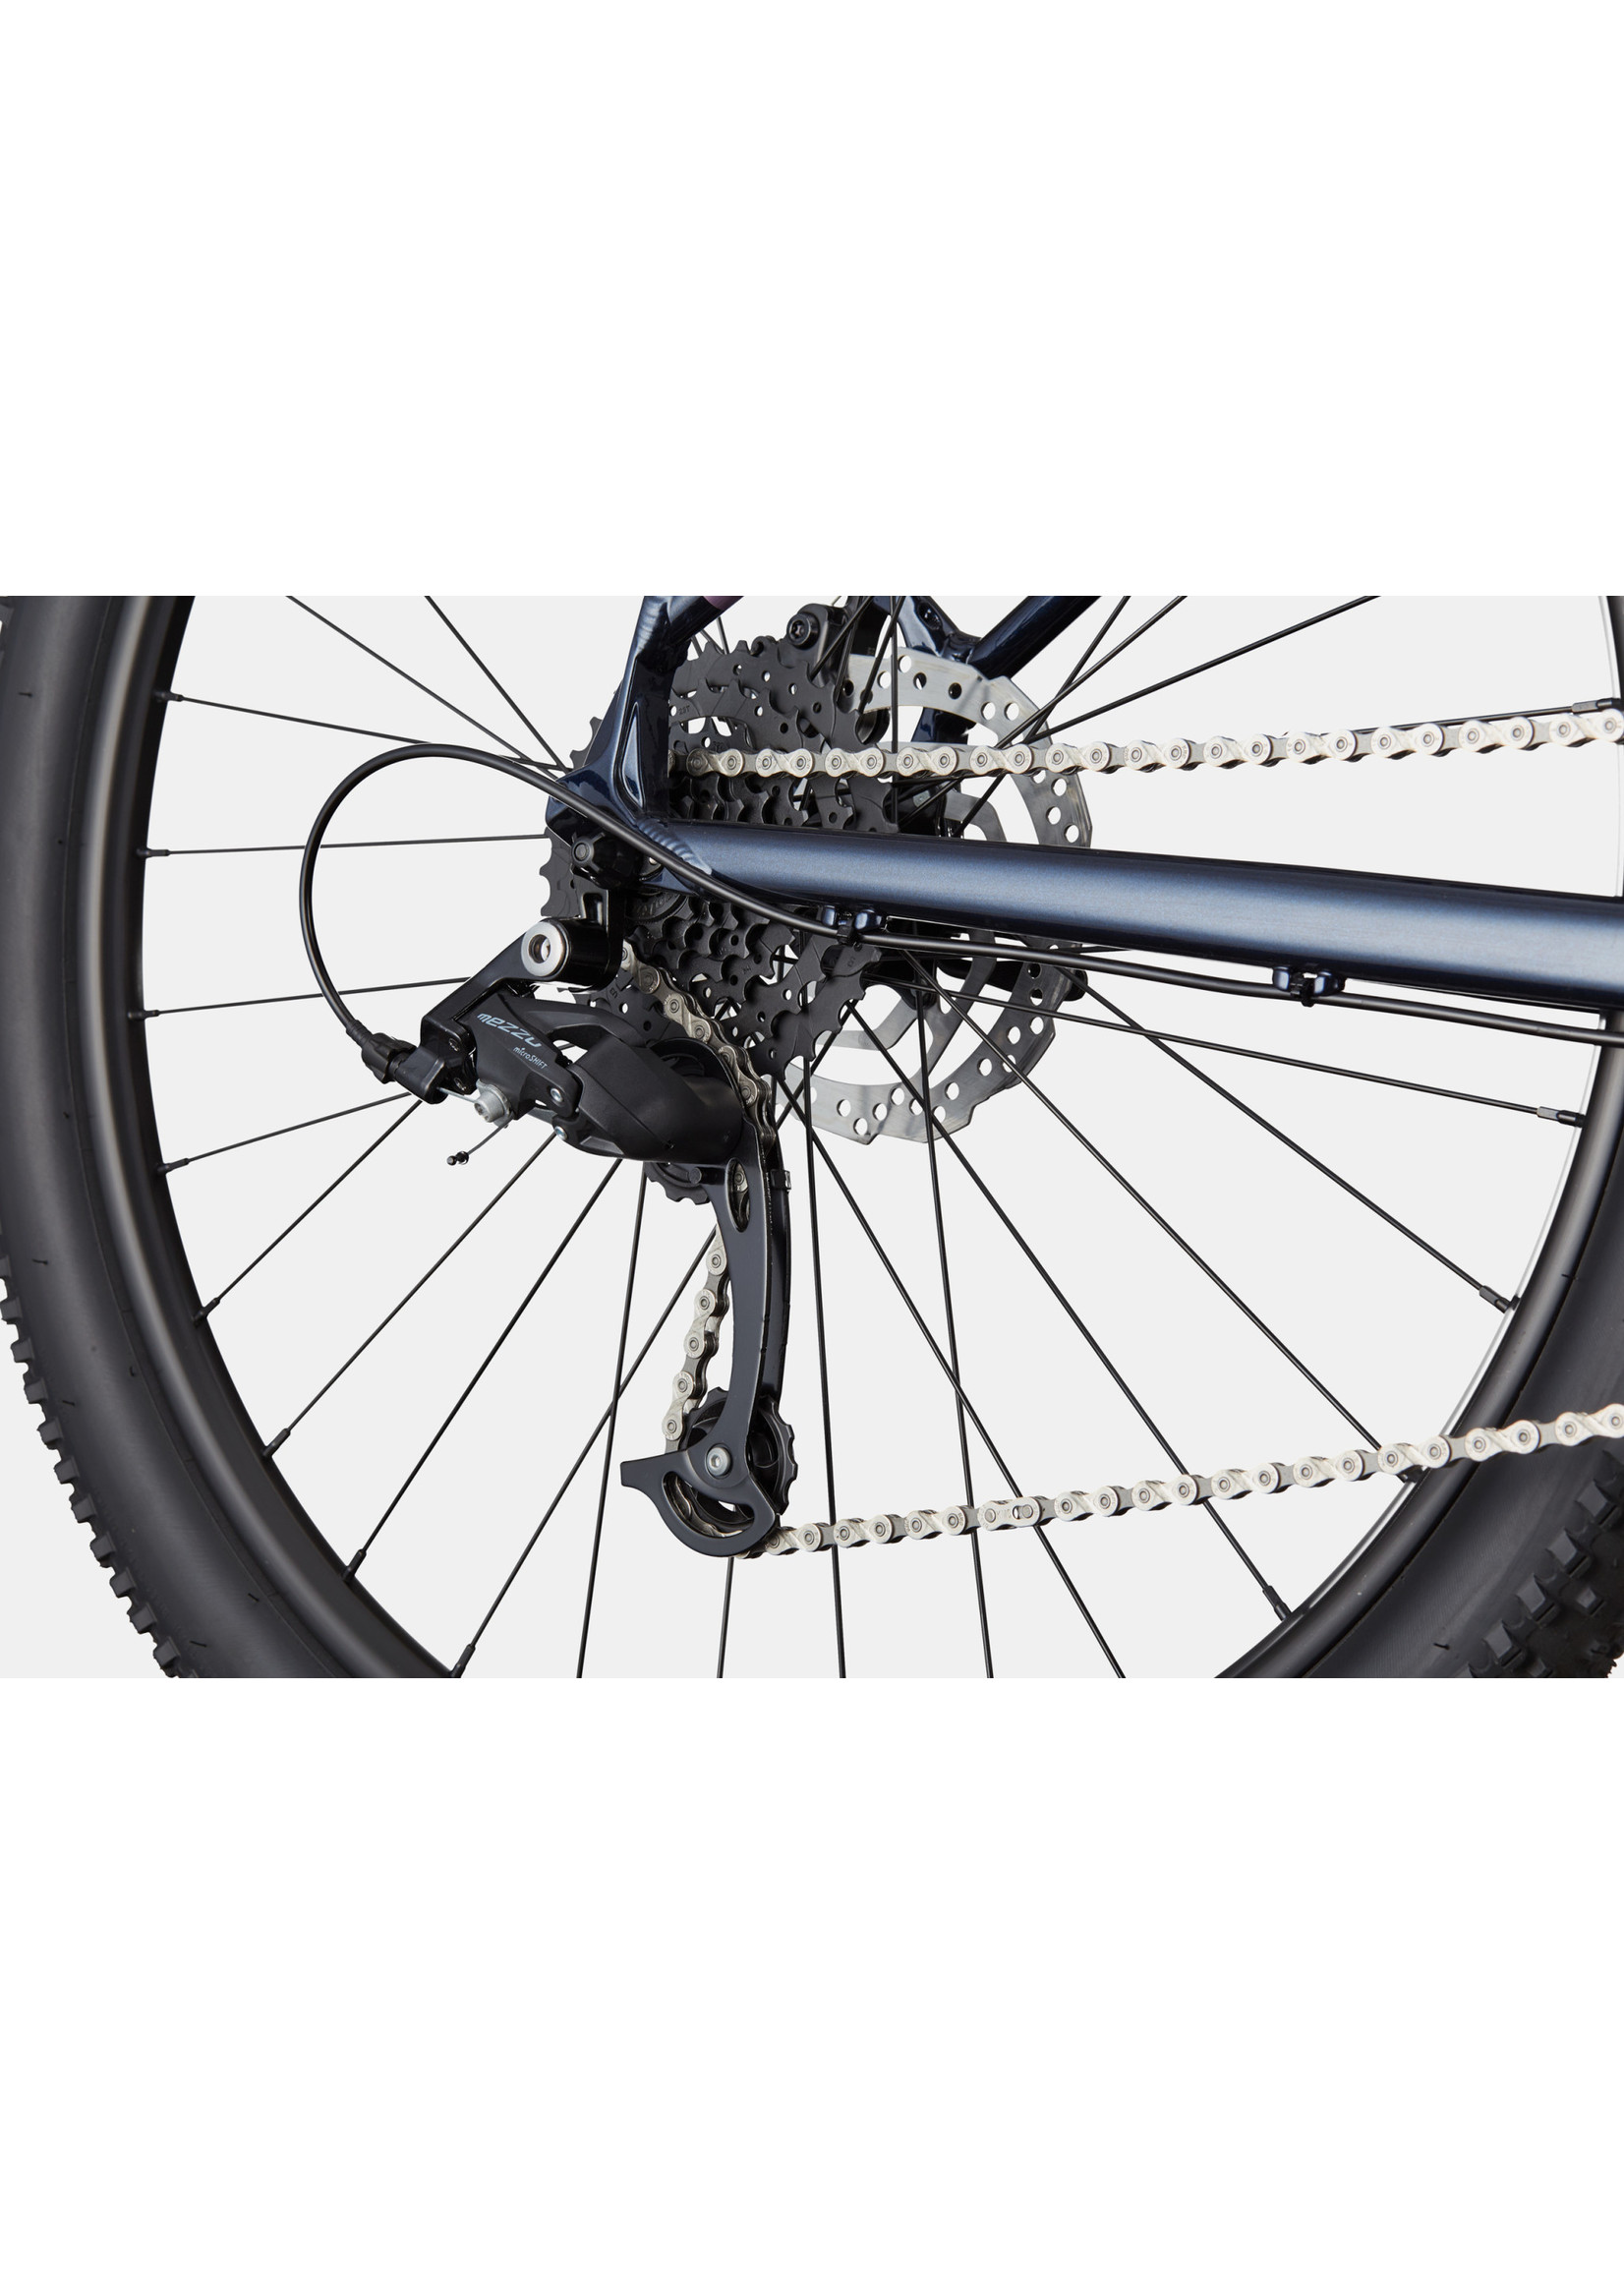 Cannondale Cannondale Trail 8 Women's Medium Midnight - MDN, MD 29 F